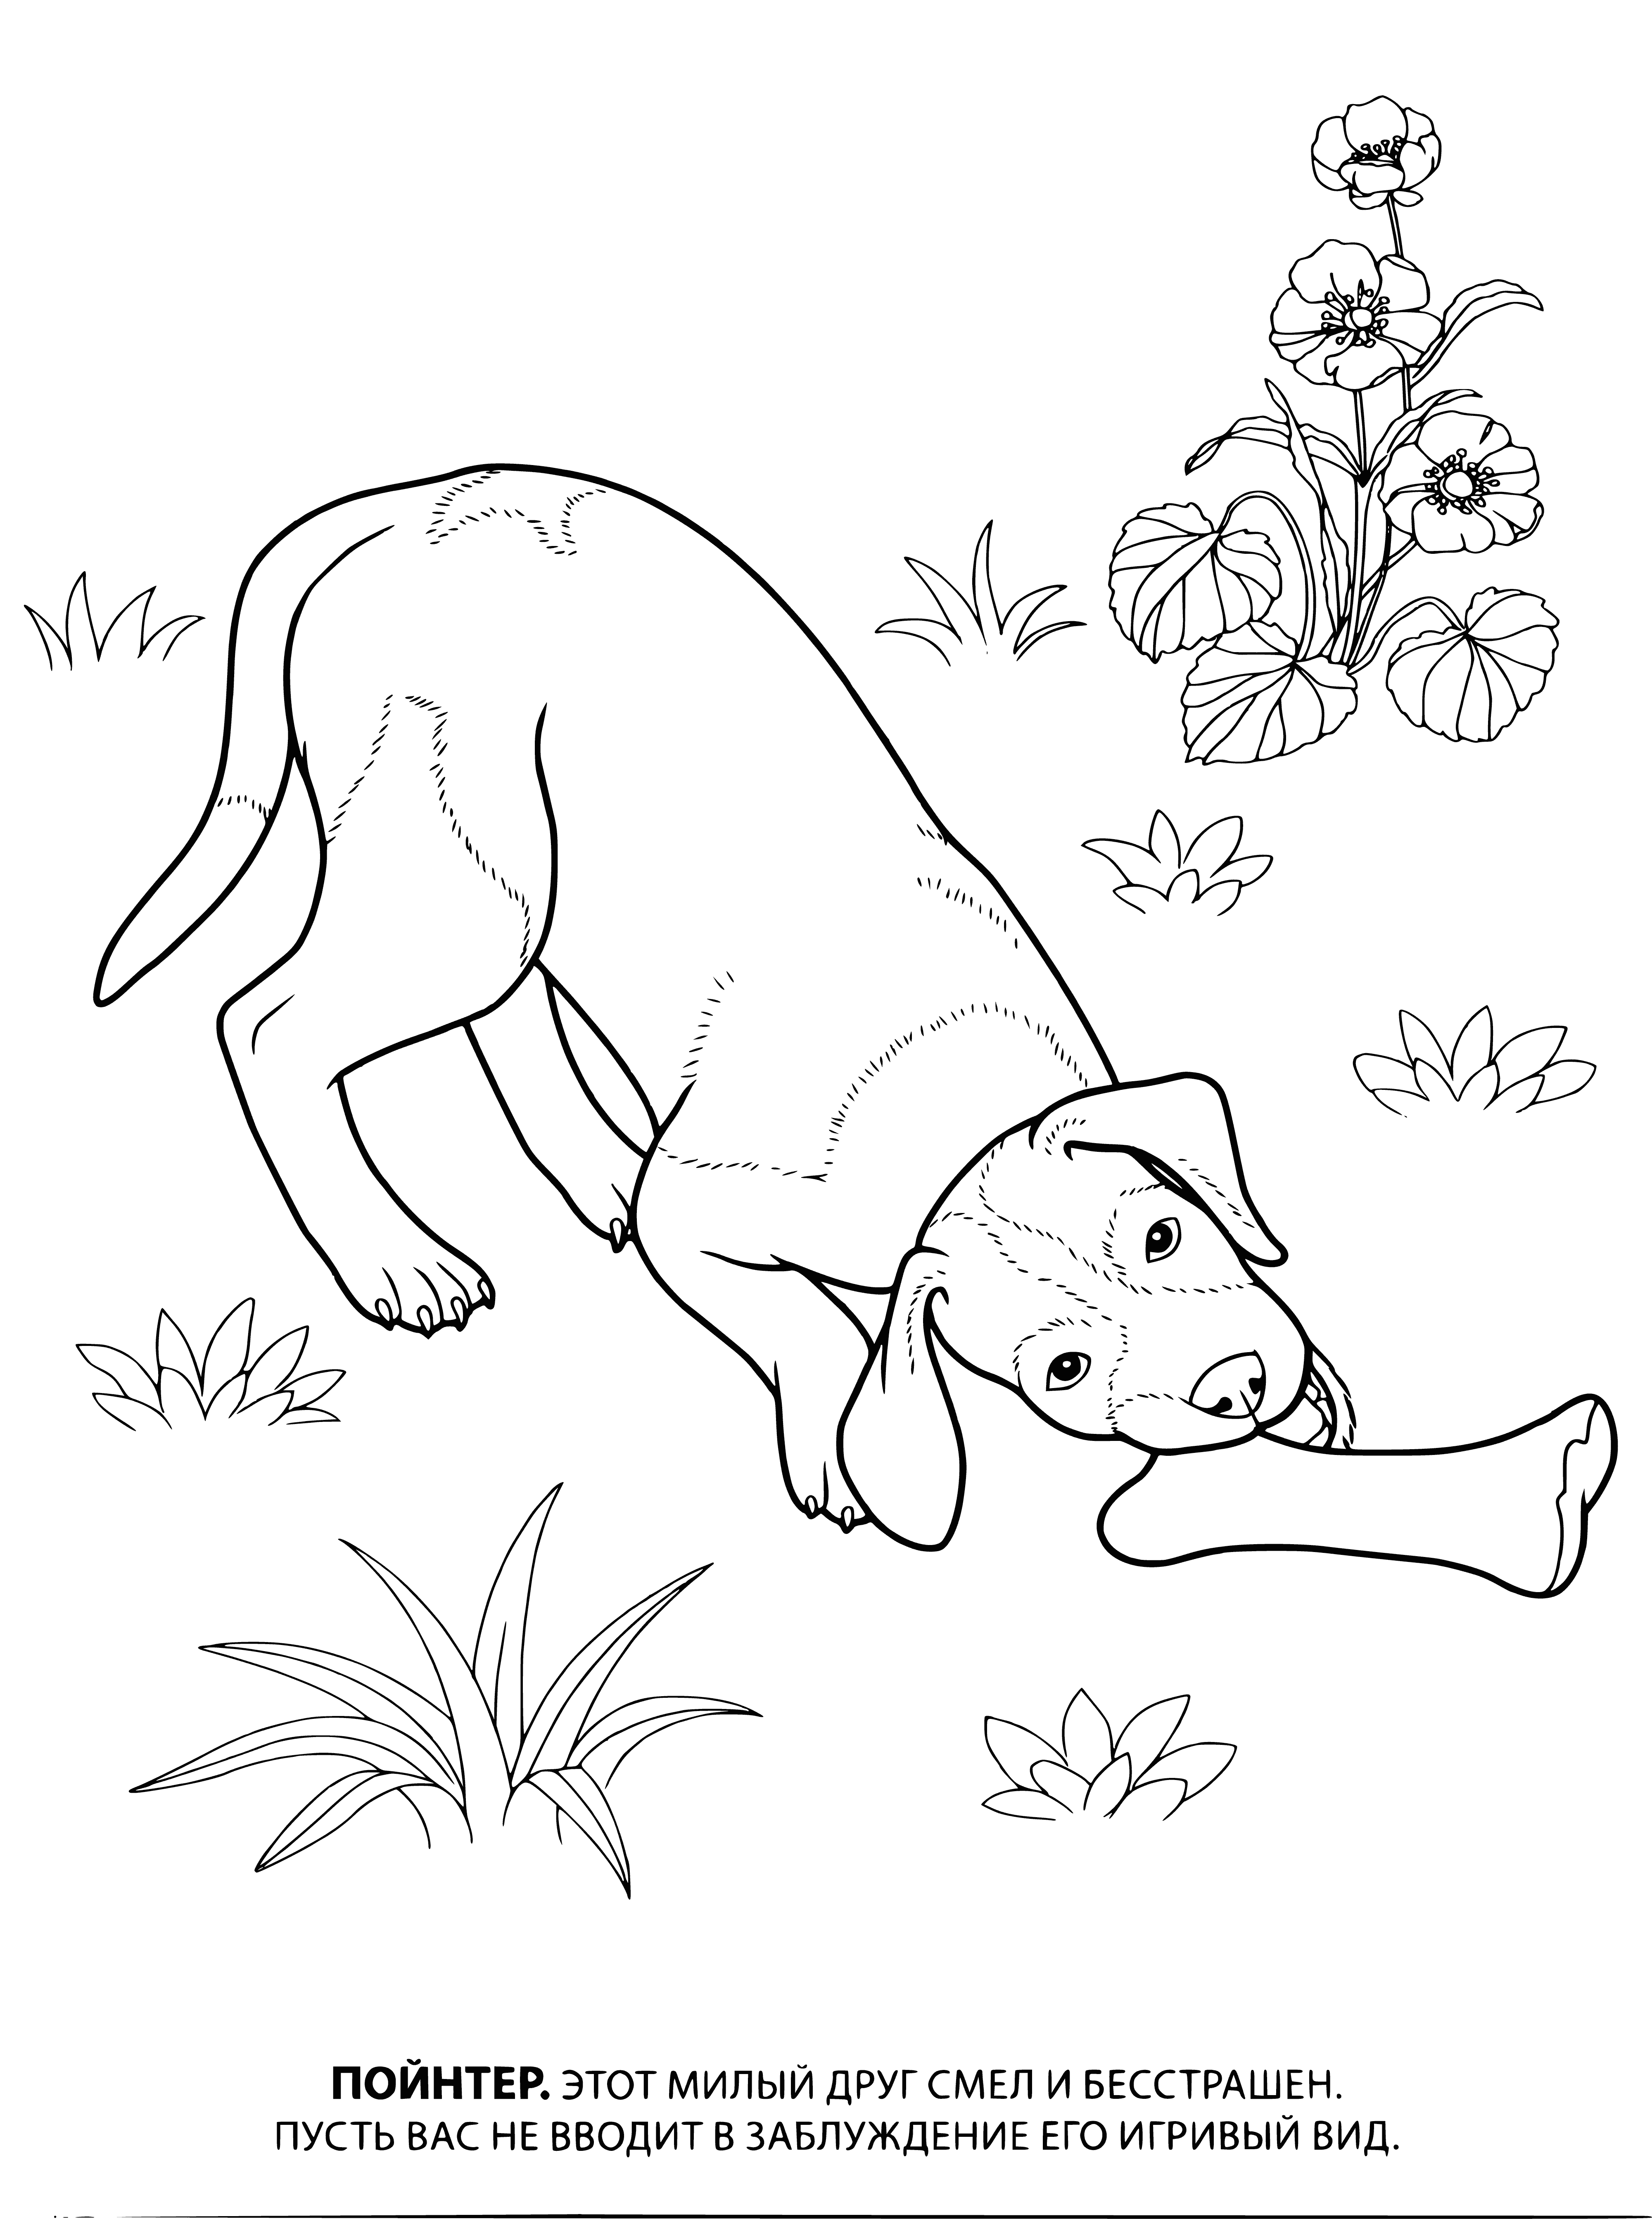 coloring page: Two brown and white dogs, one standing and one sitting, facing away from each other -- a fun coloring page! #coloring #doglovers